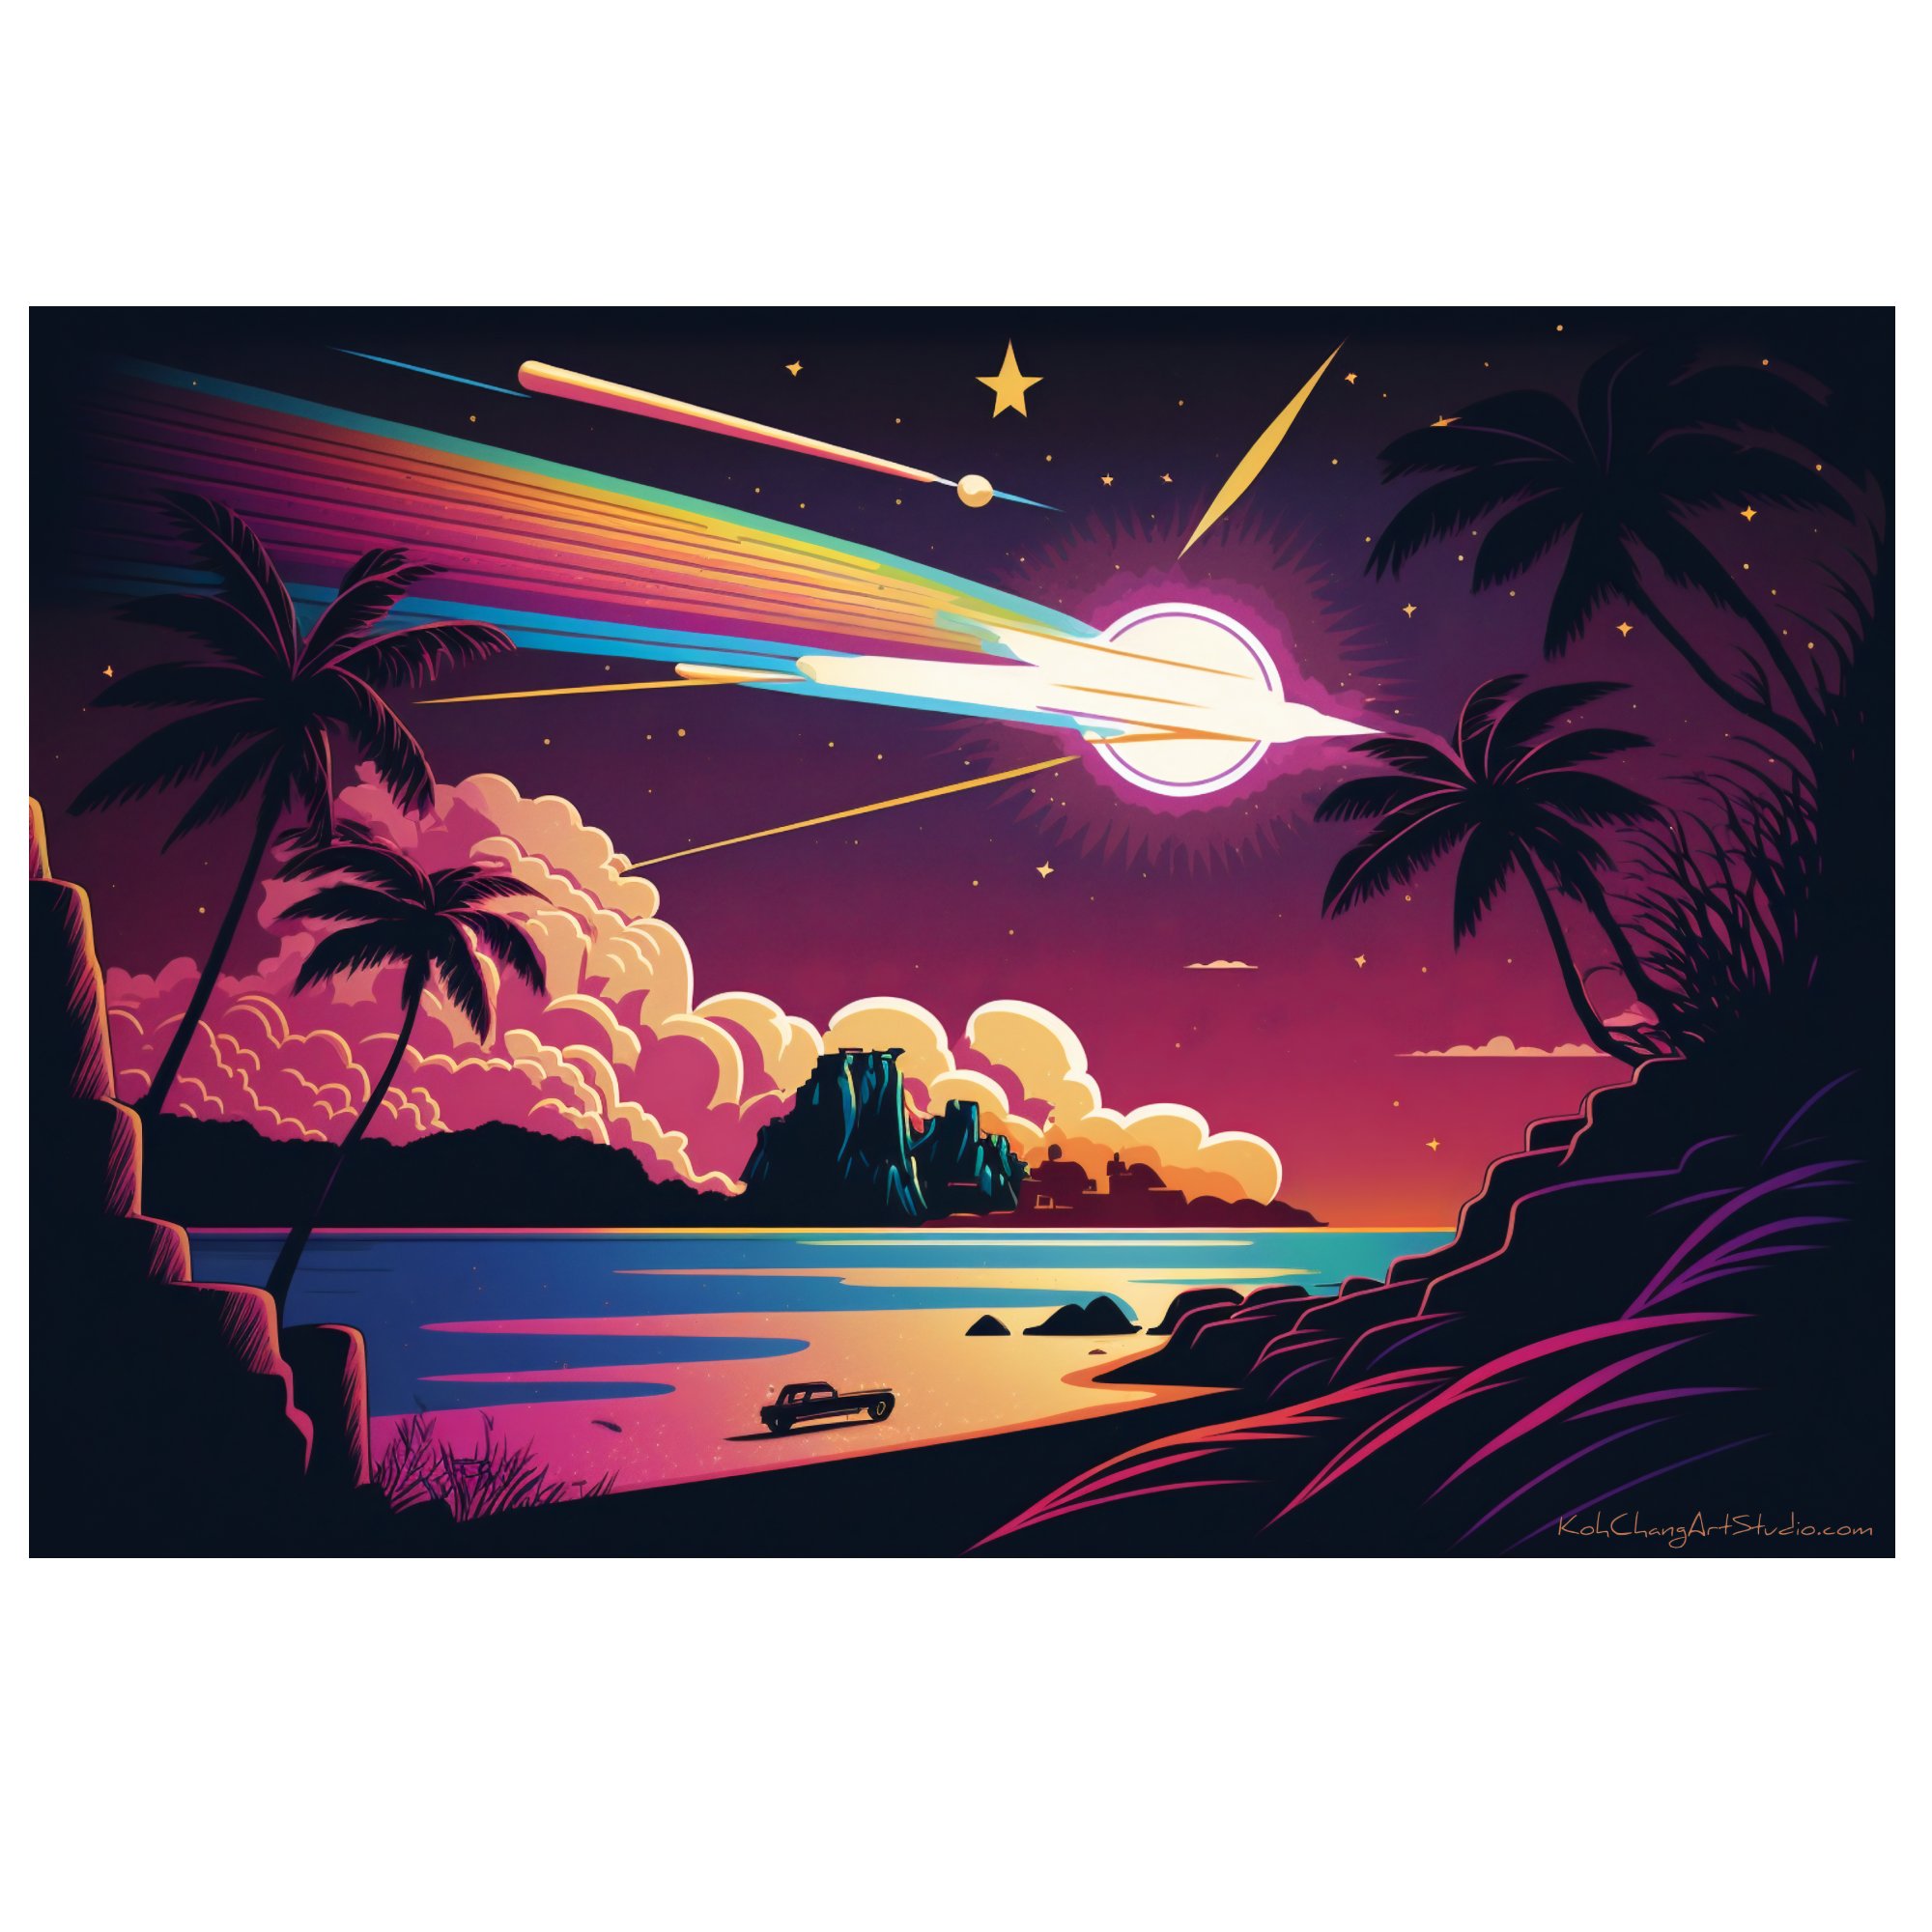 STARLIT ESCAPE Design - Meteorite slicing the sky, weaving a tapestry of wonder on a tropical shore.